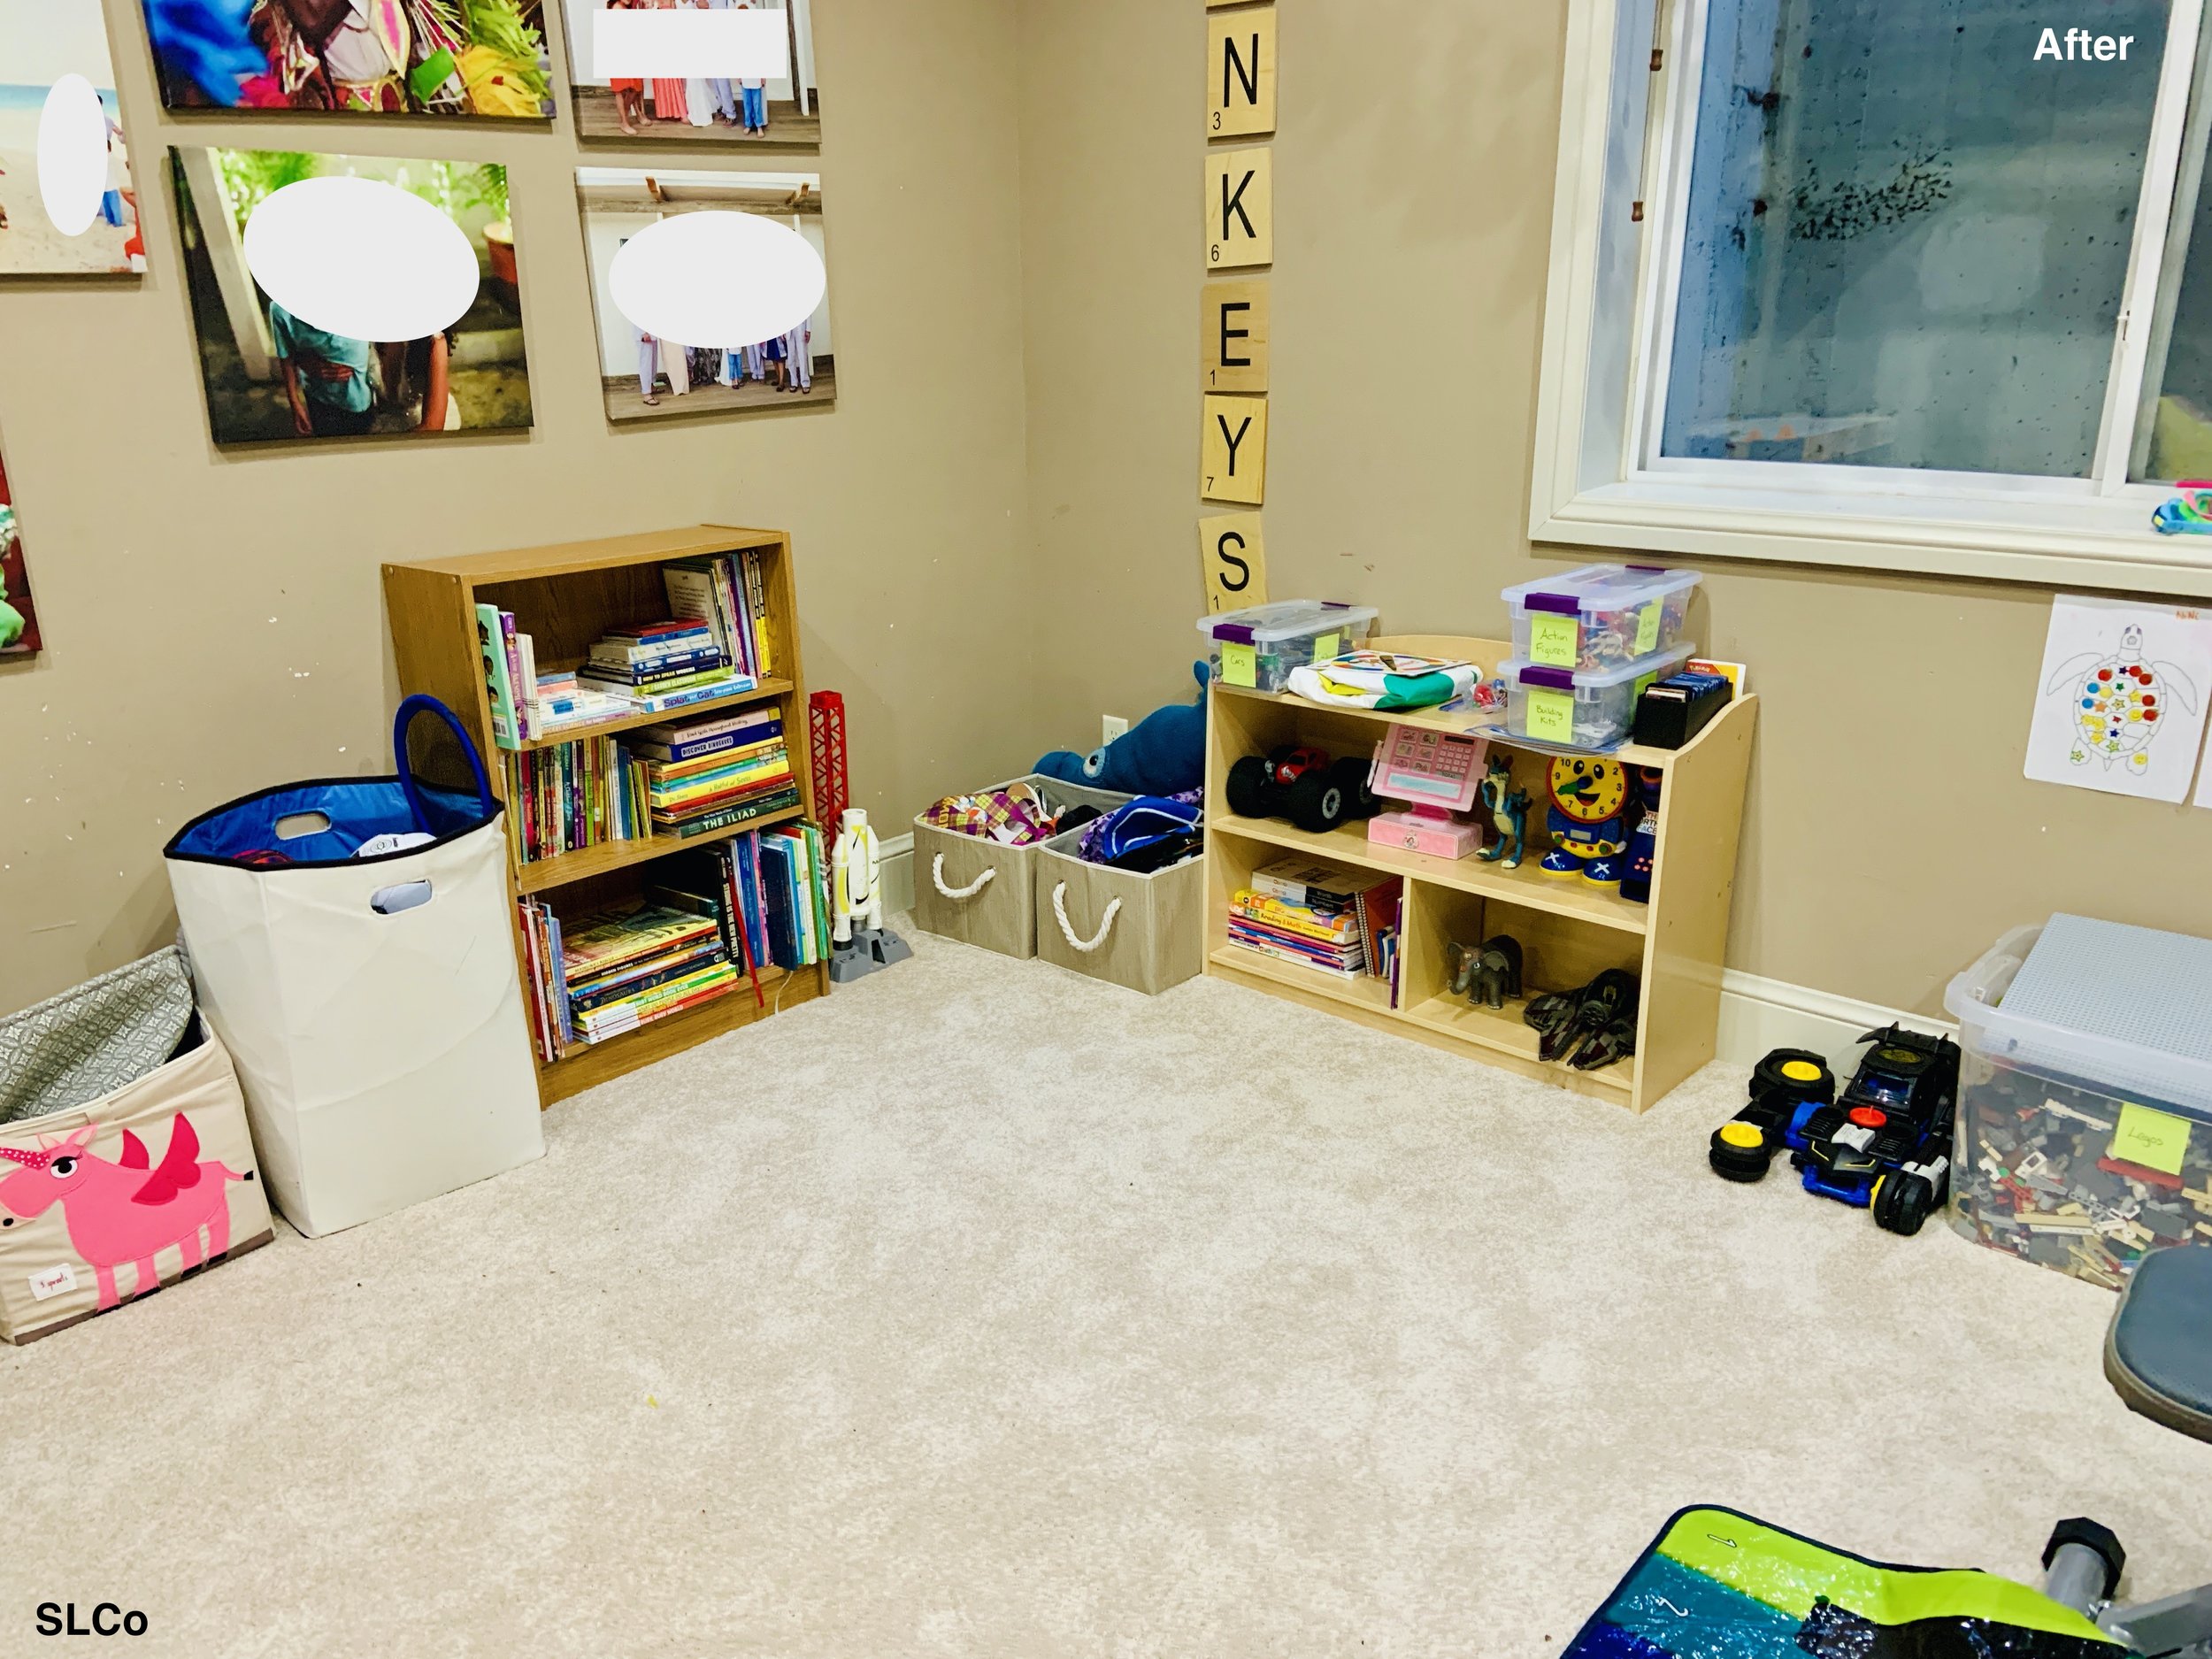 After image of playroom with photos on the wall, bookshelf with books organized, and toys in homes.